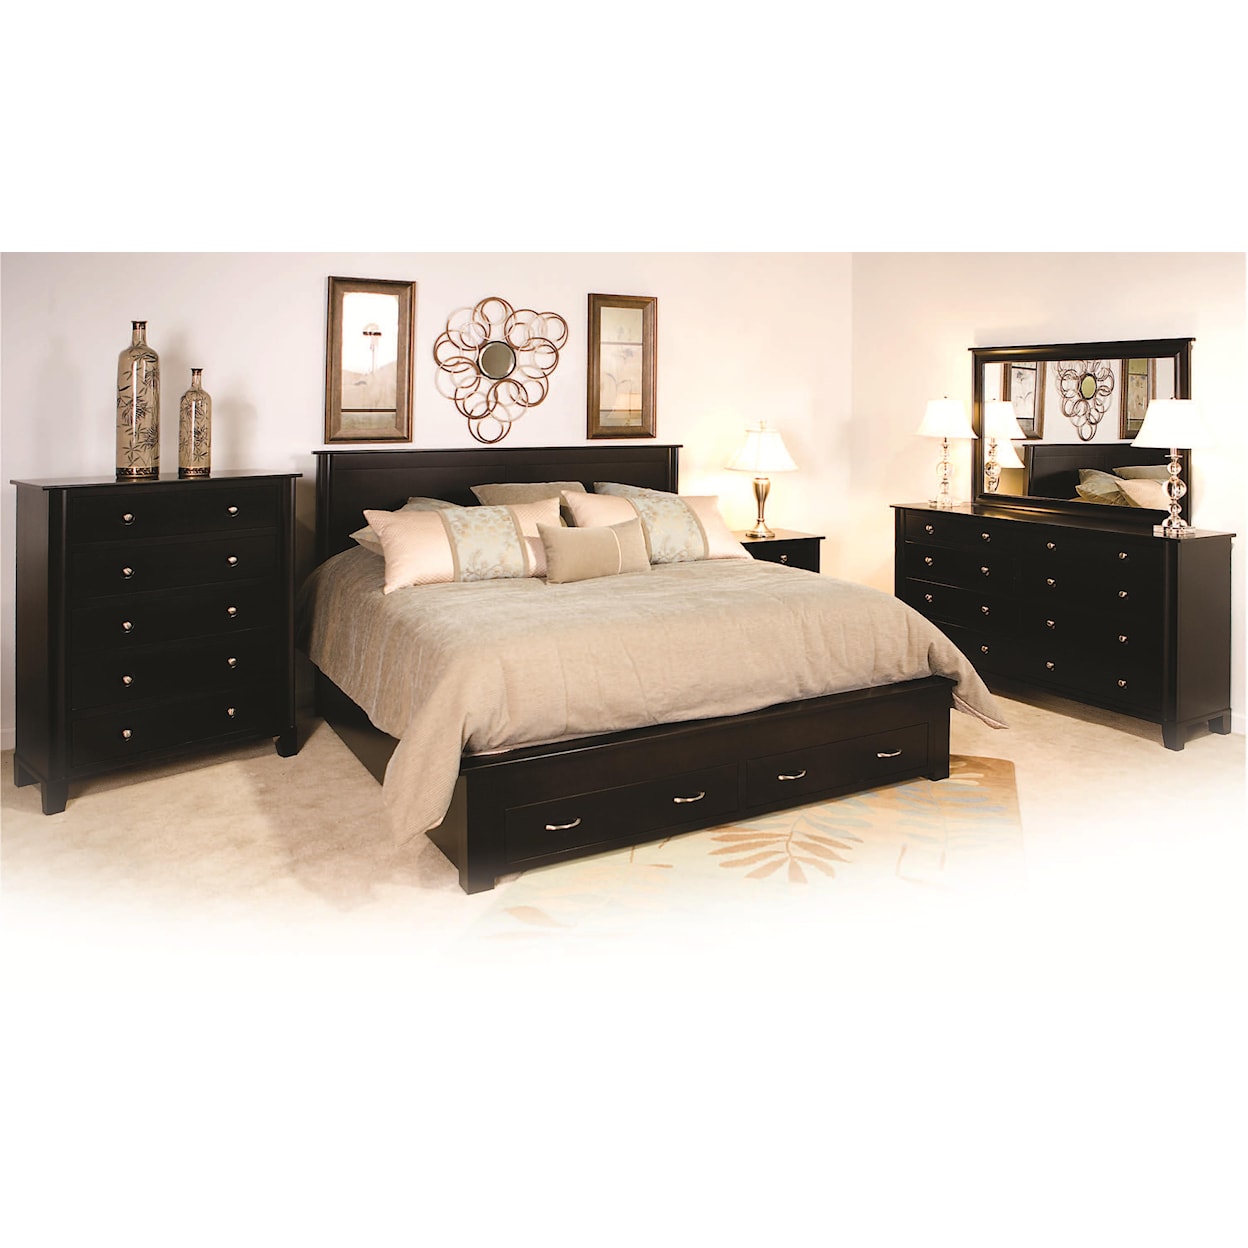 Daniel's Amish Cosmopolitan Queen Bed with 2 Footboard Drawers 